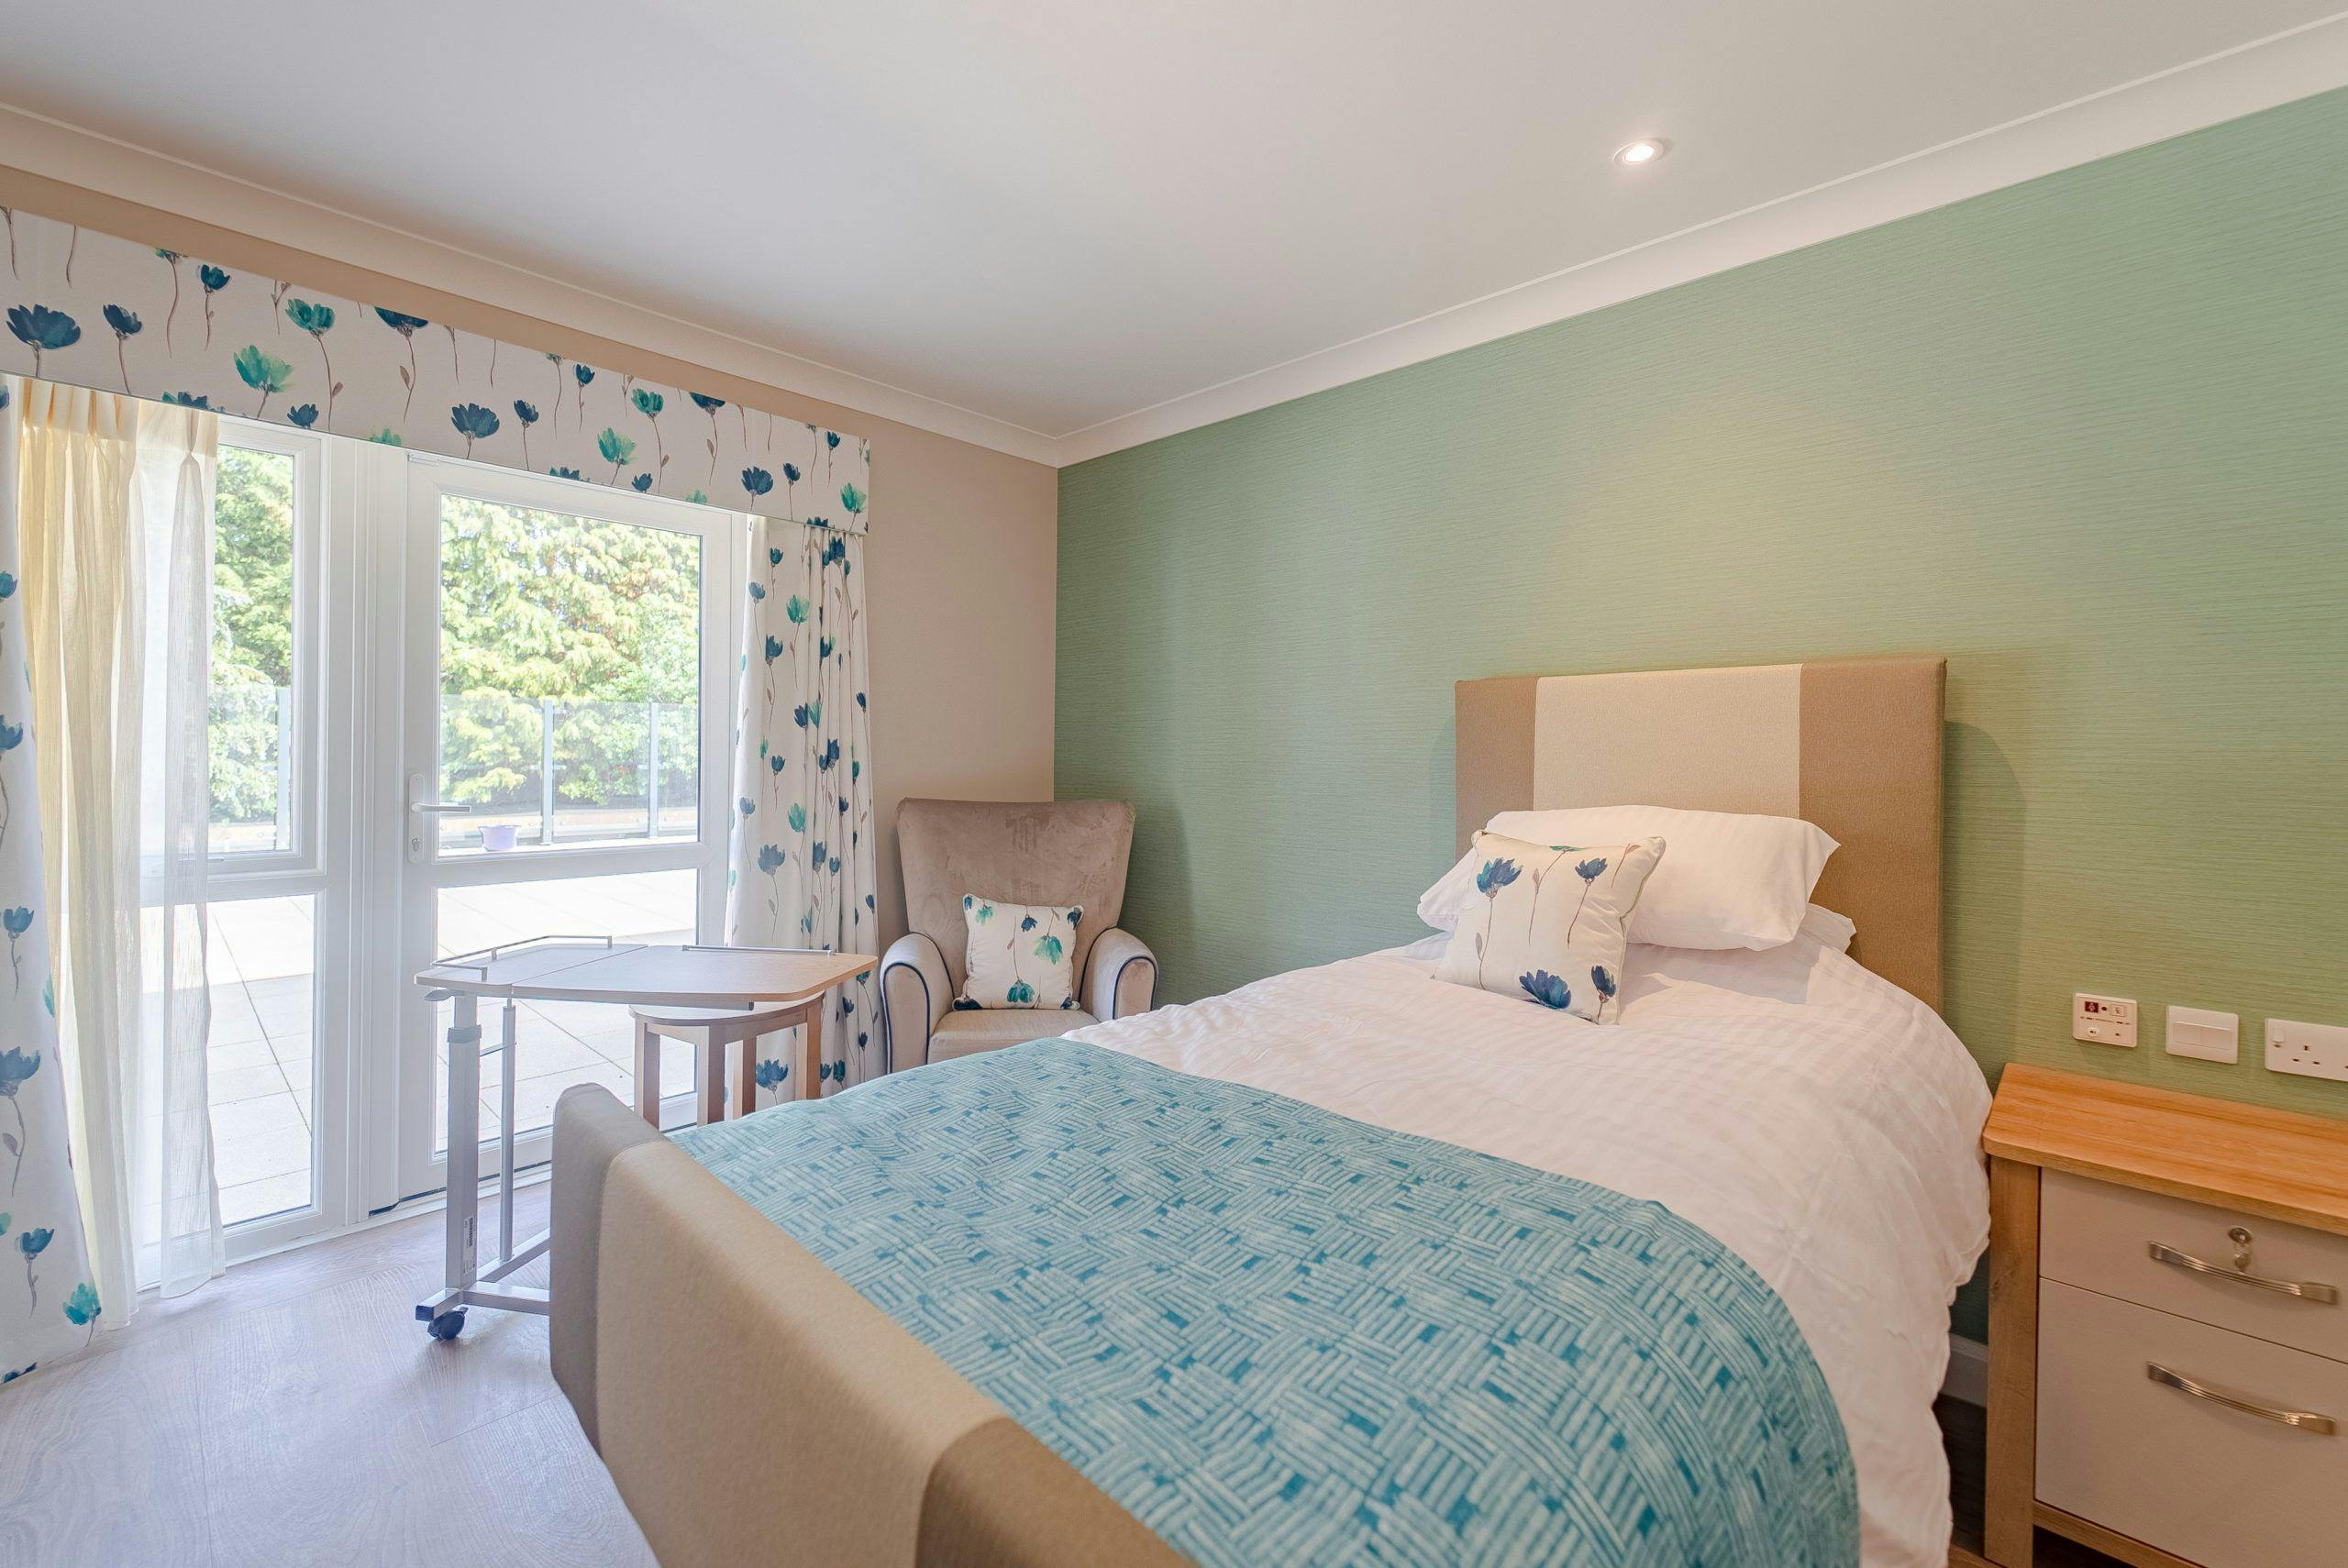 Bedroom of Halmer Court care home in Spalding, Lincolshire